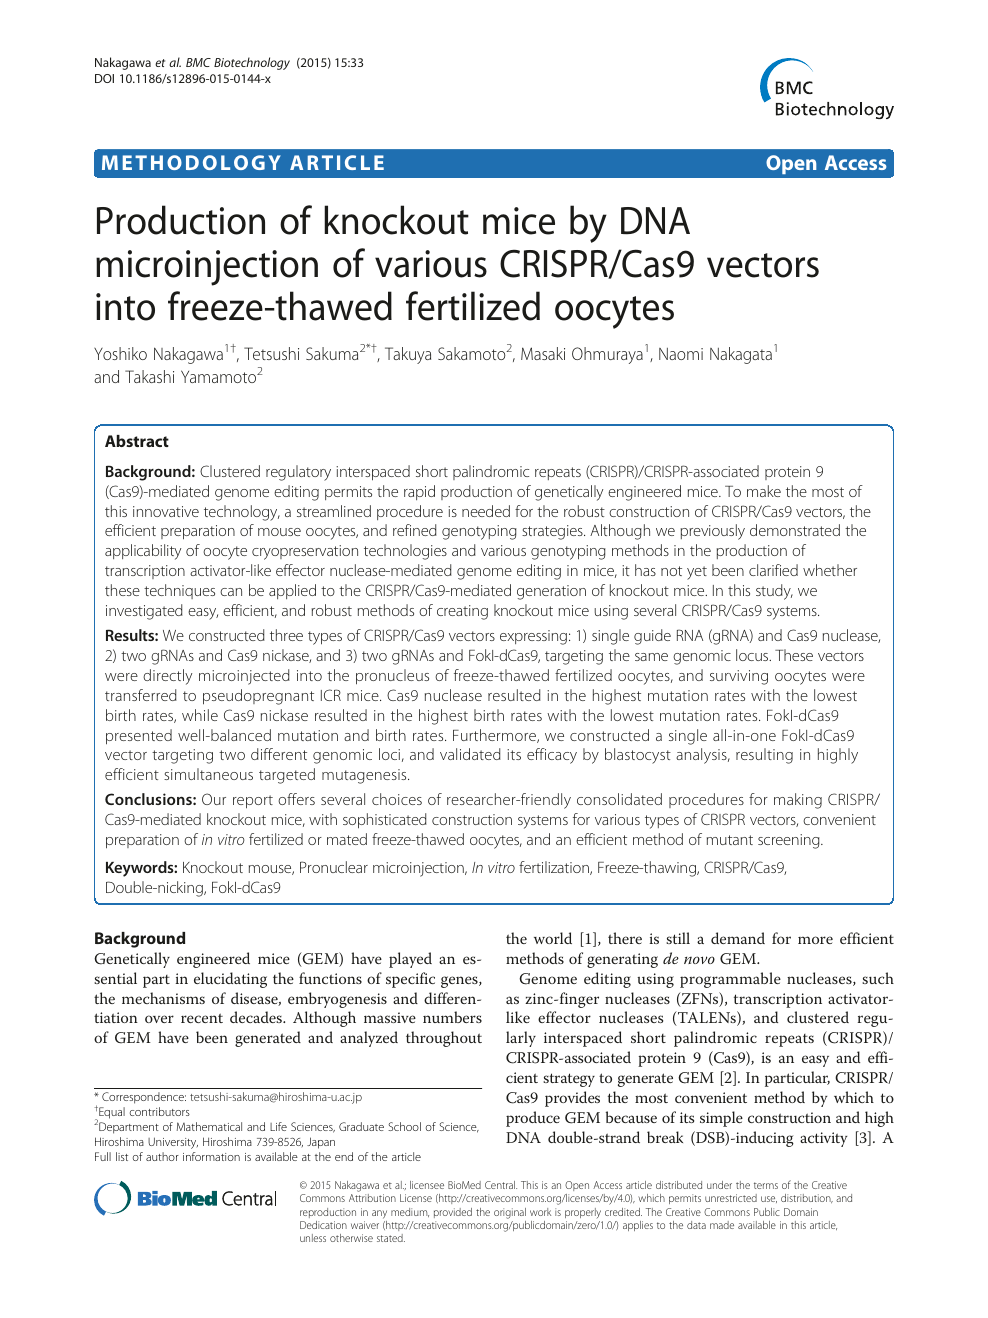 Production Of Knockout Mice By Dna Microinjection Of Various Crispr Cas9 Vectors Into Freeze Thawed Fertilized Oocytes Topic Of Research Paper In Biological Sciences Download Scholarly Article Pdf And Read For Free On